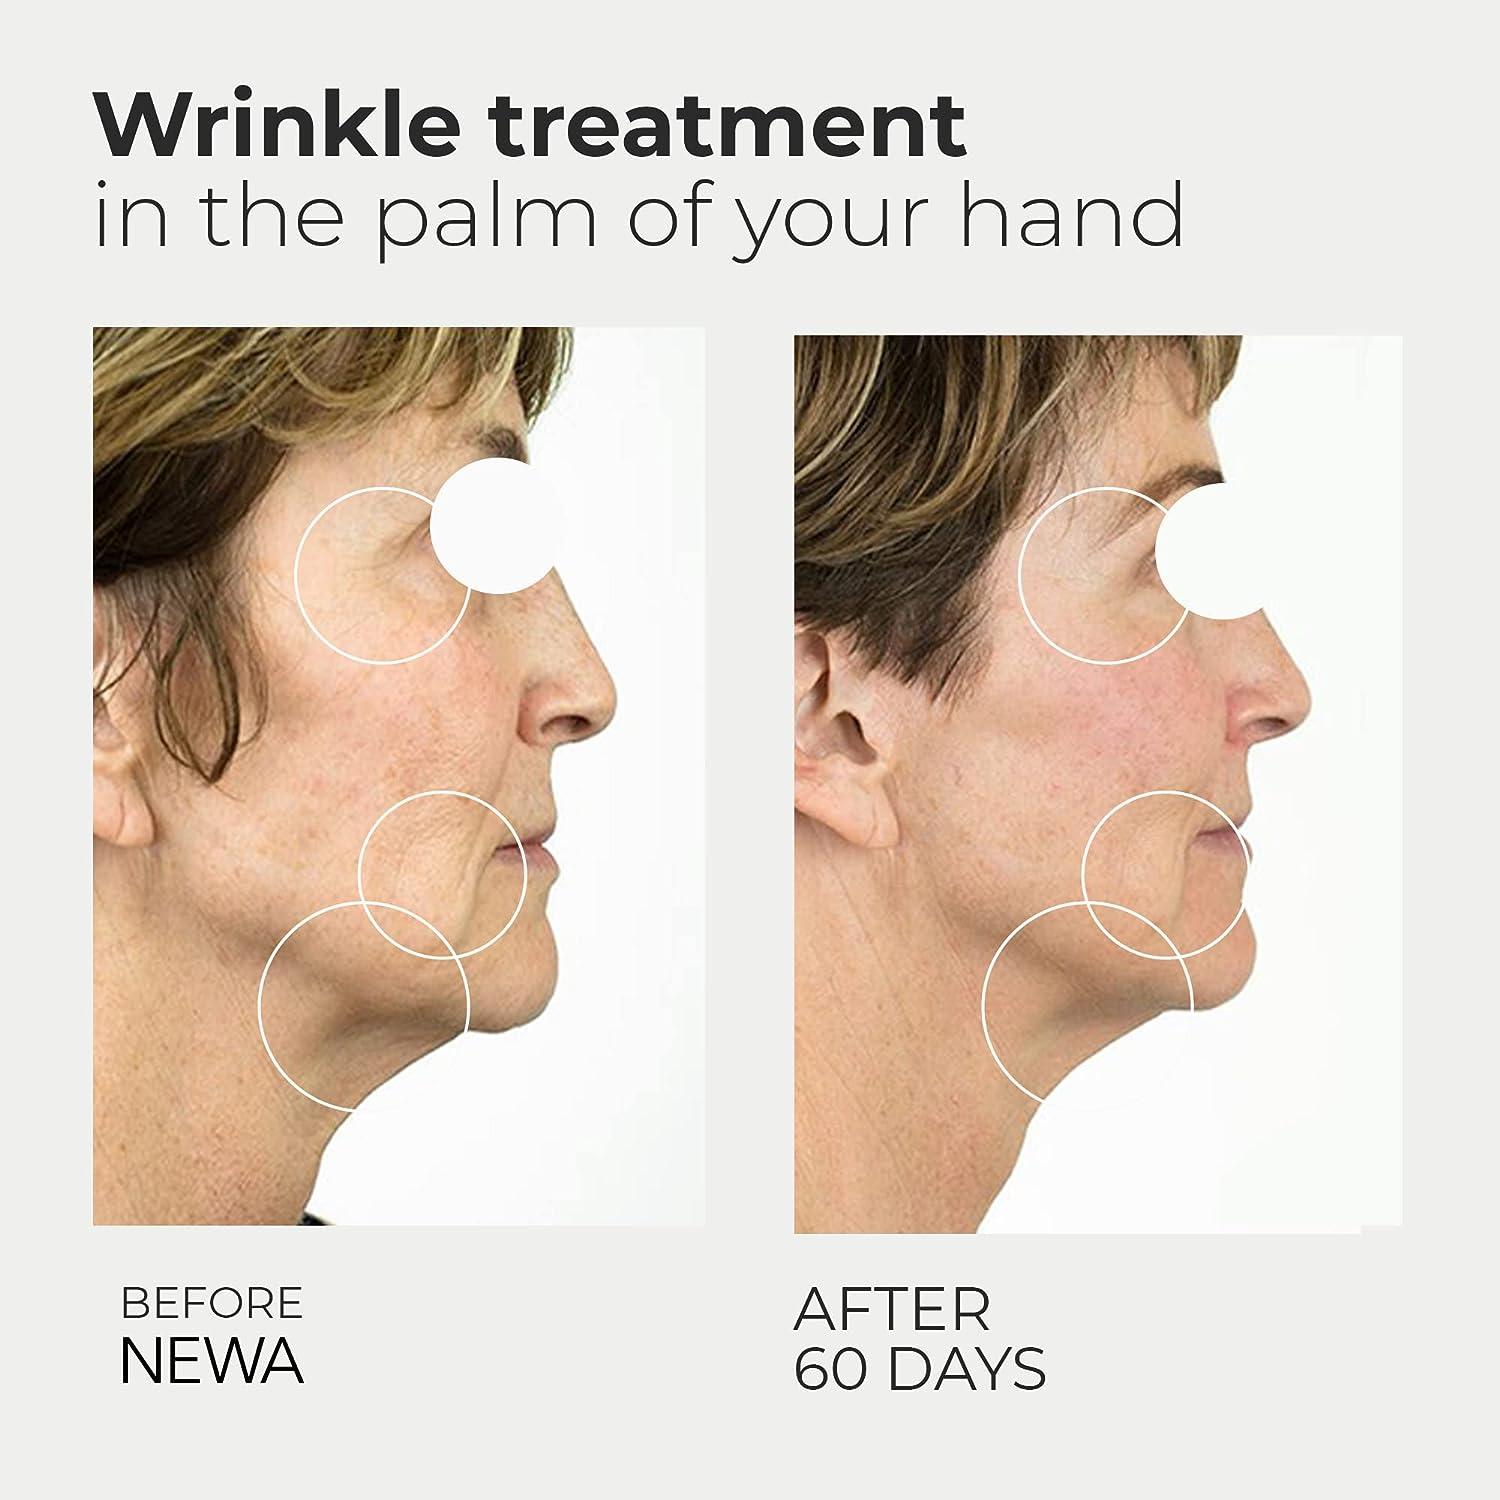 Using a TENS Unit for Wrinkles: What You Need to Know - Use or Not Use